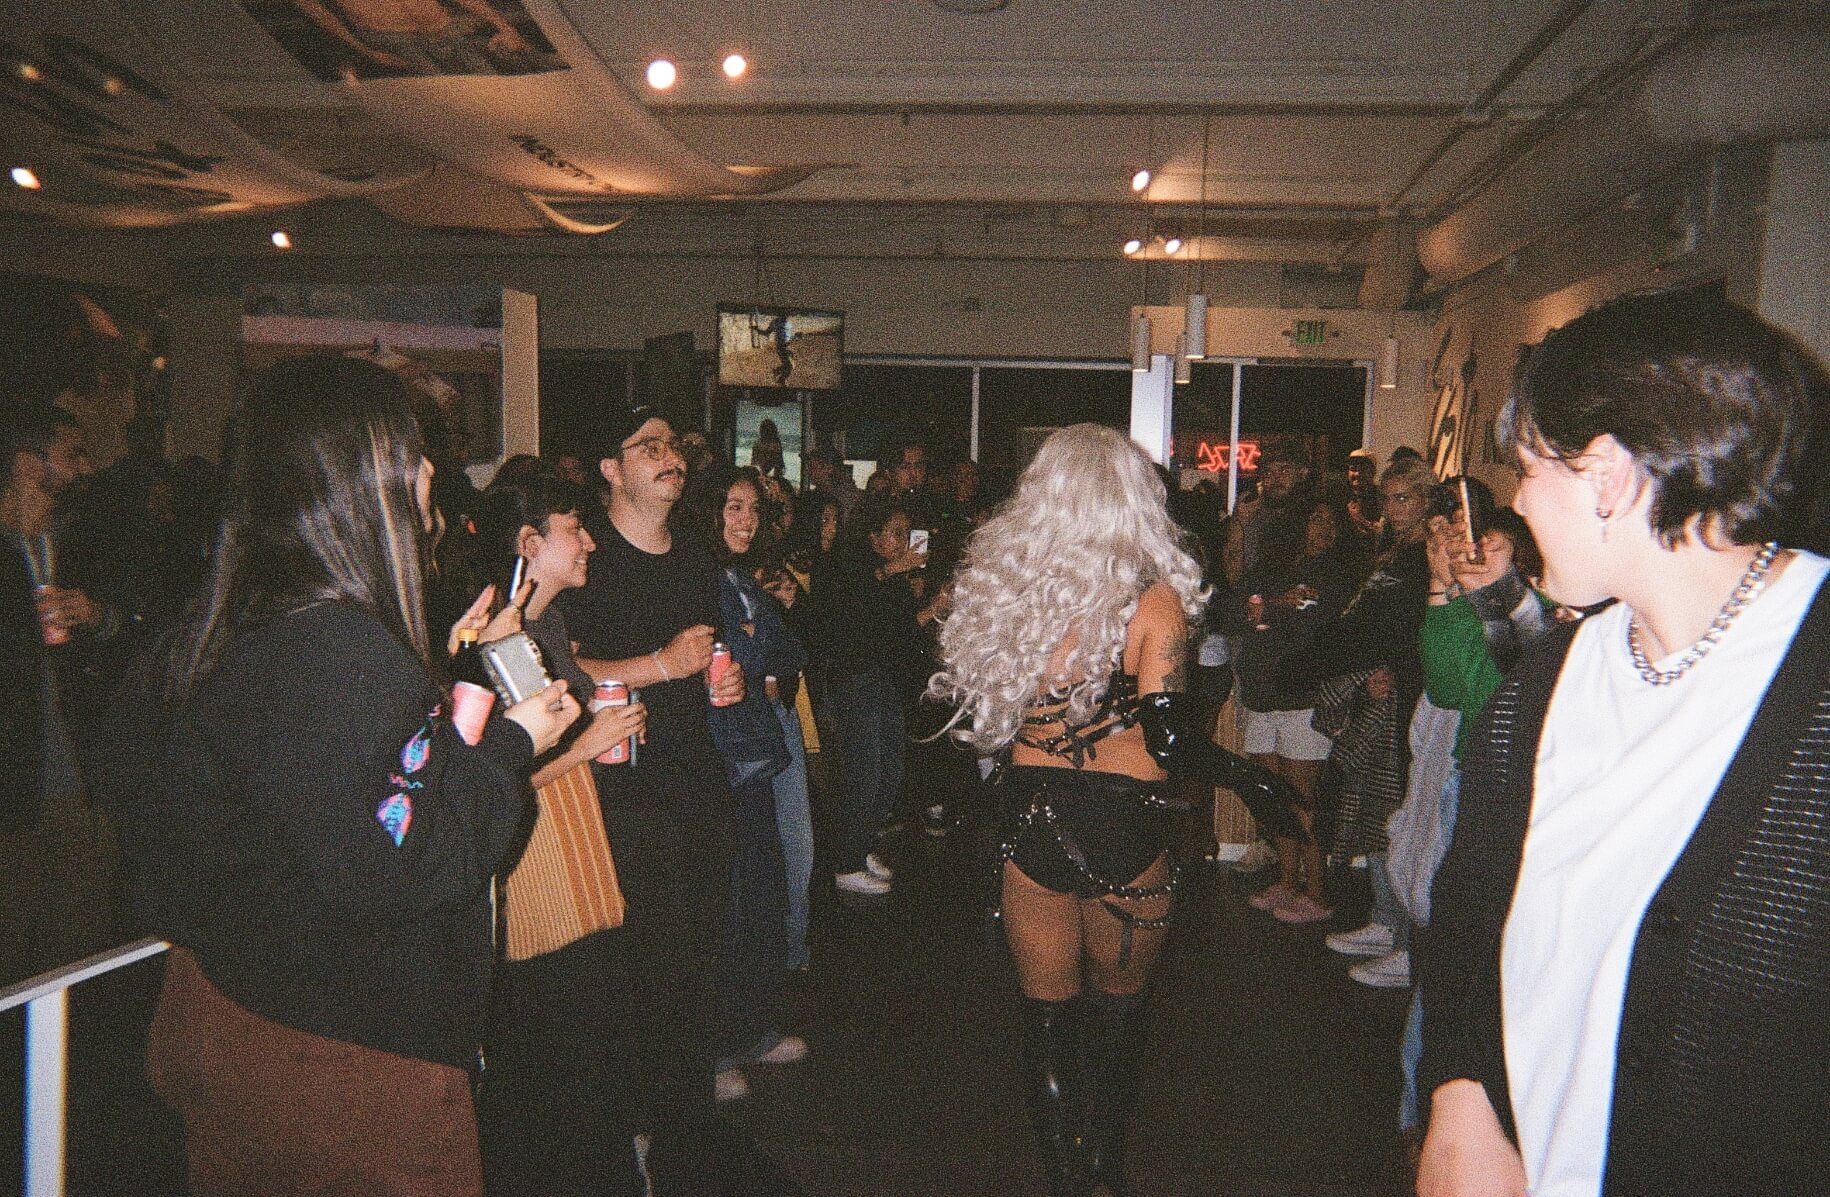 drag performer in light blond wig and walks by a group of people at art gallery while doing a drag performance